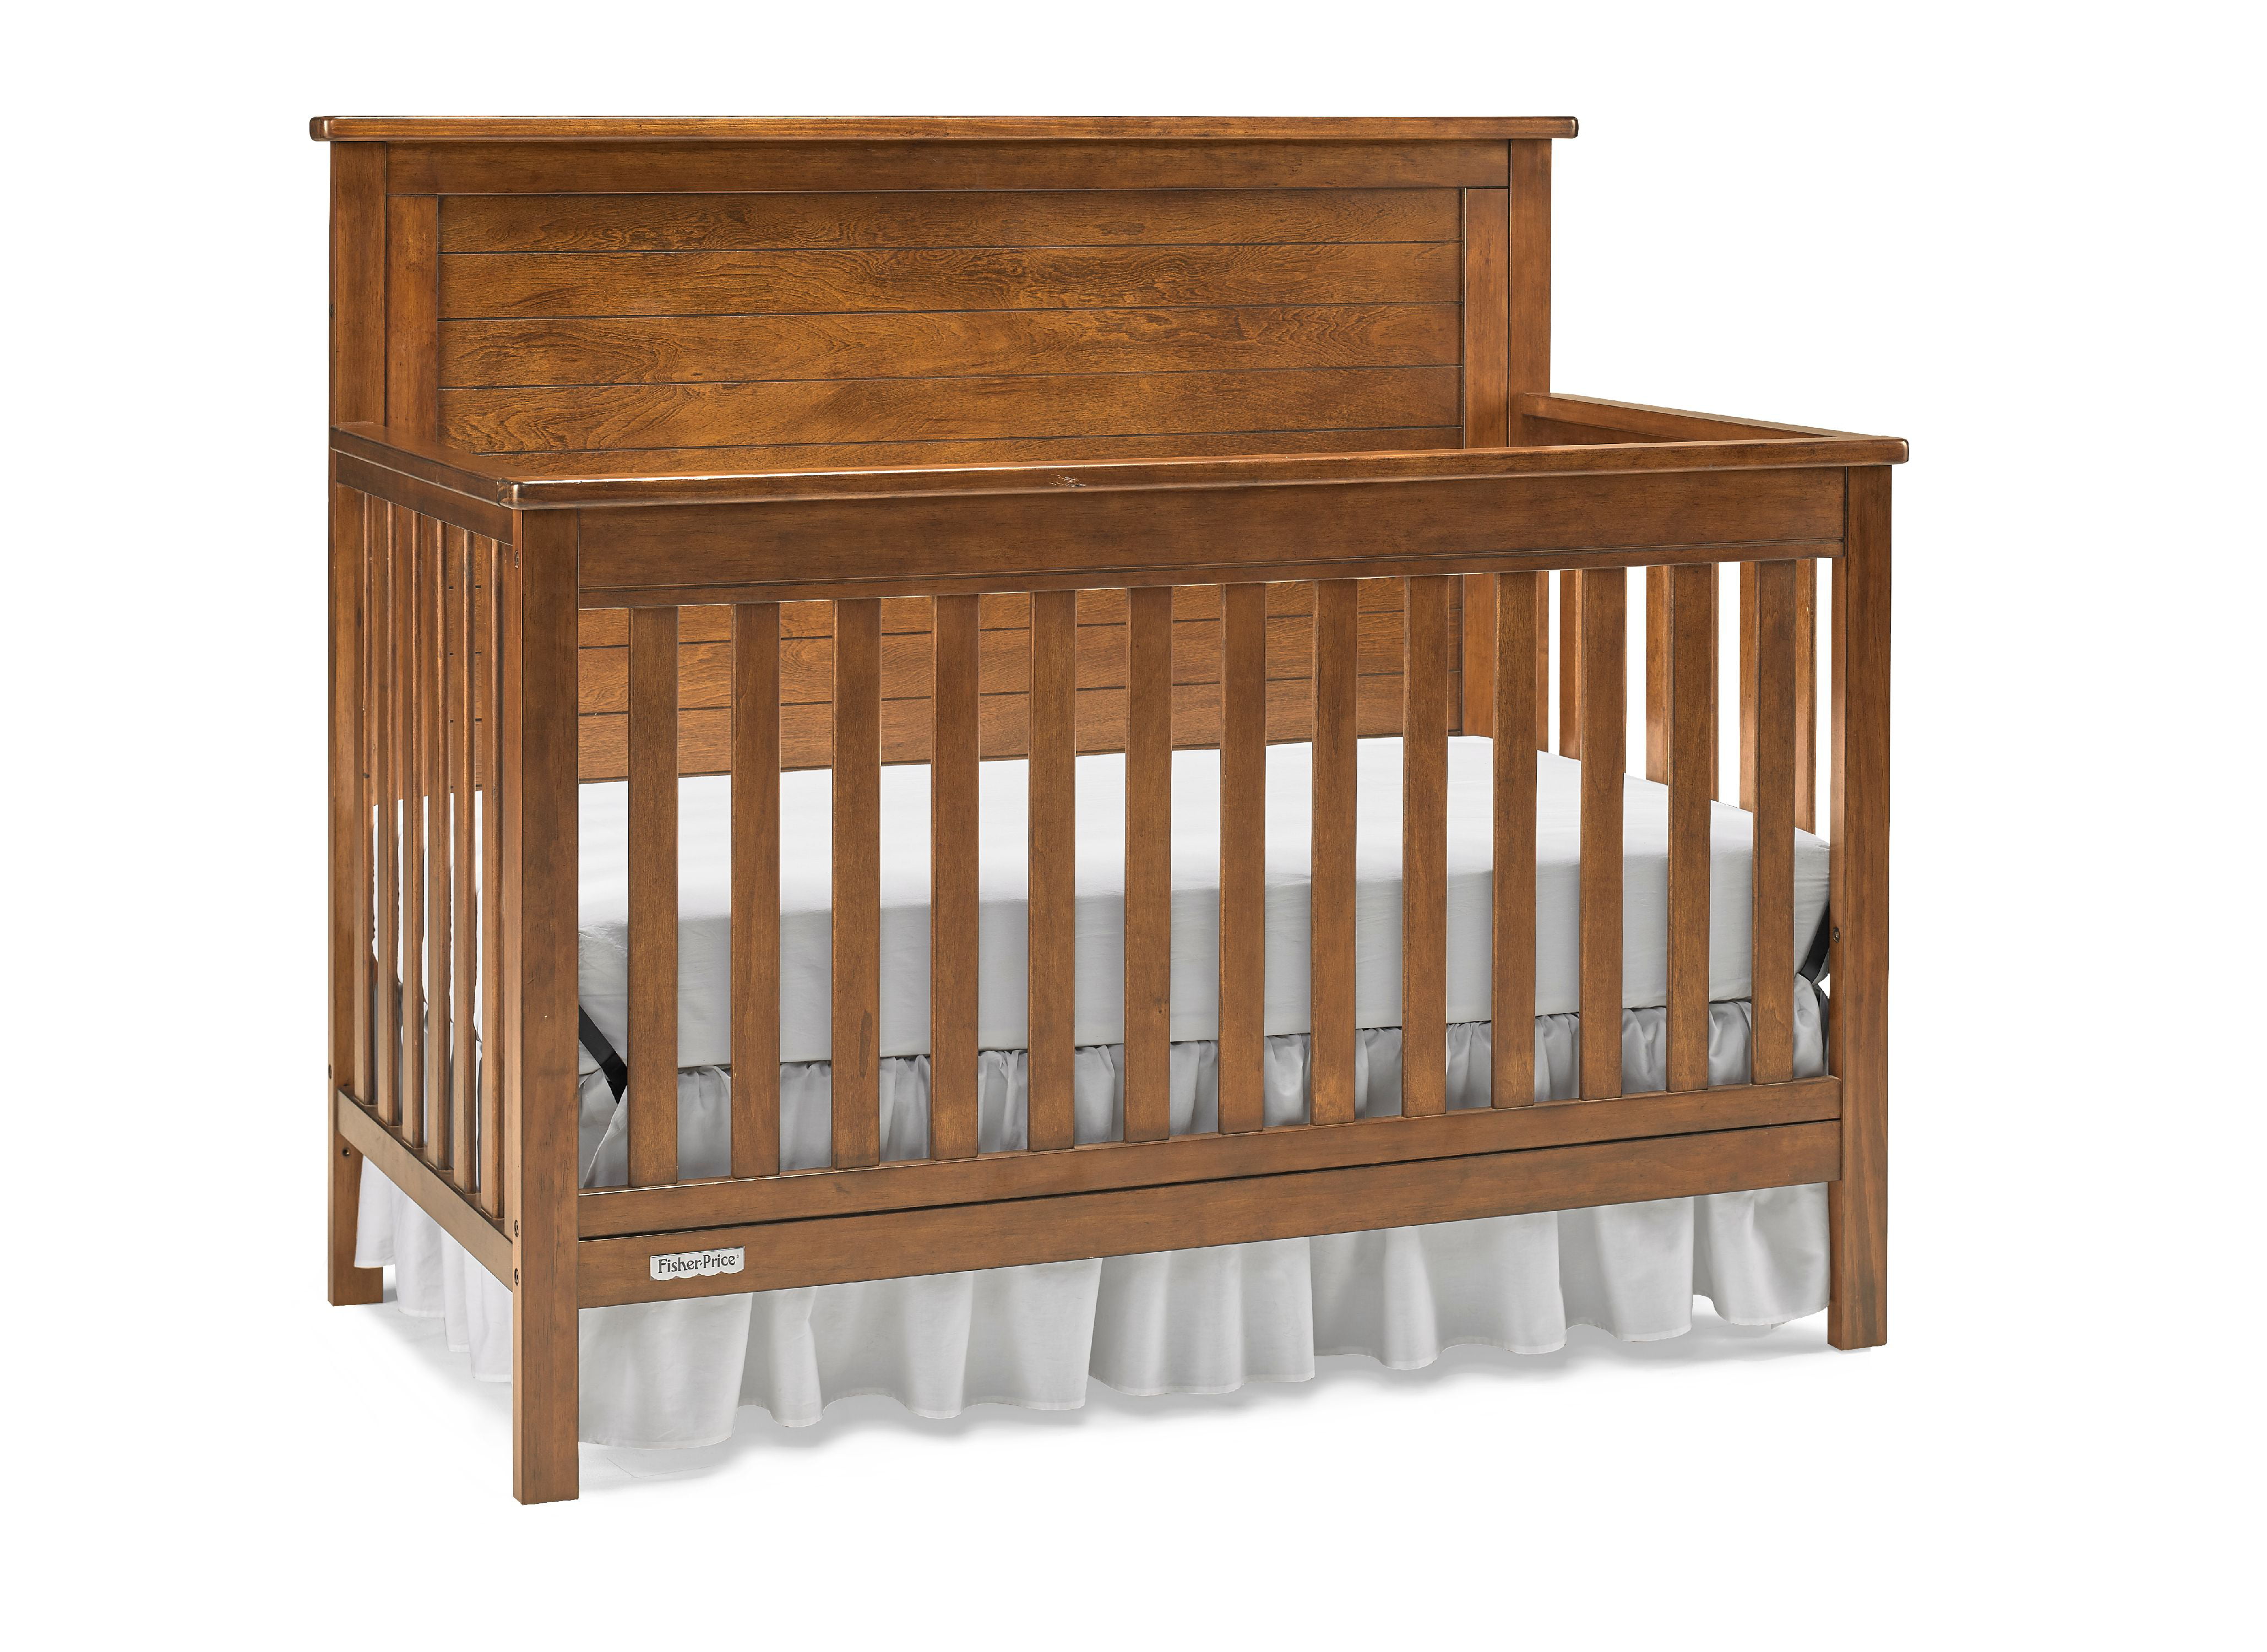 Fisher-Price Paxton 4-in-1 Convertible Crib Vintage Grey 